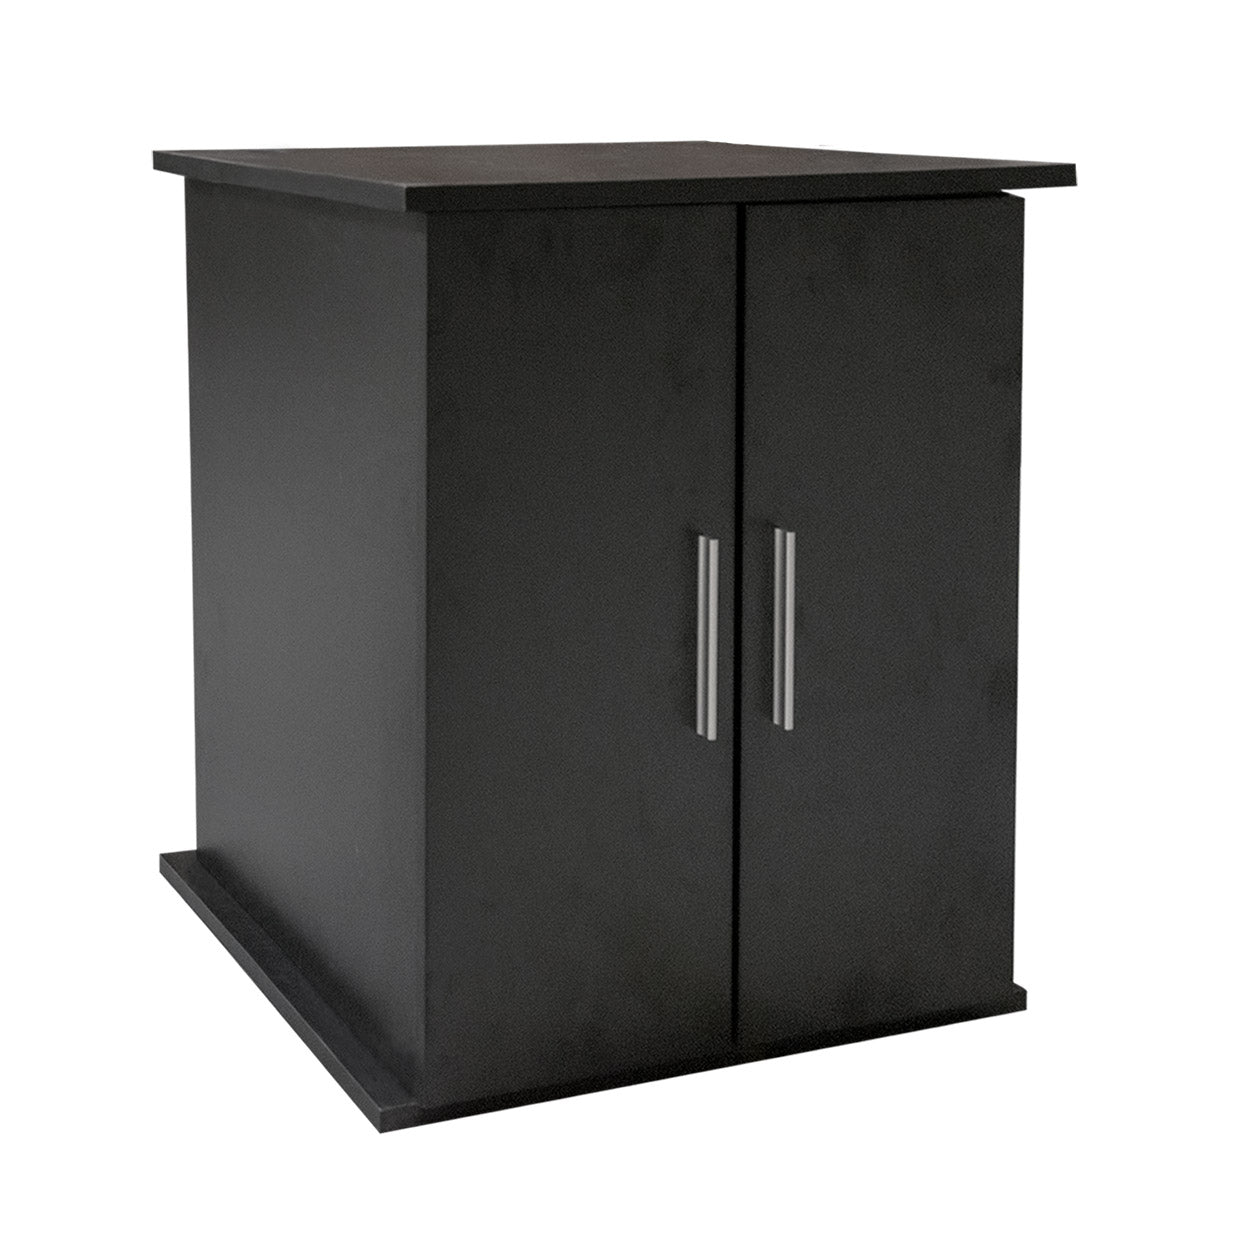 Seapora Empress Cabnit Stand - Black (Special Order Product)